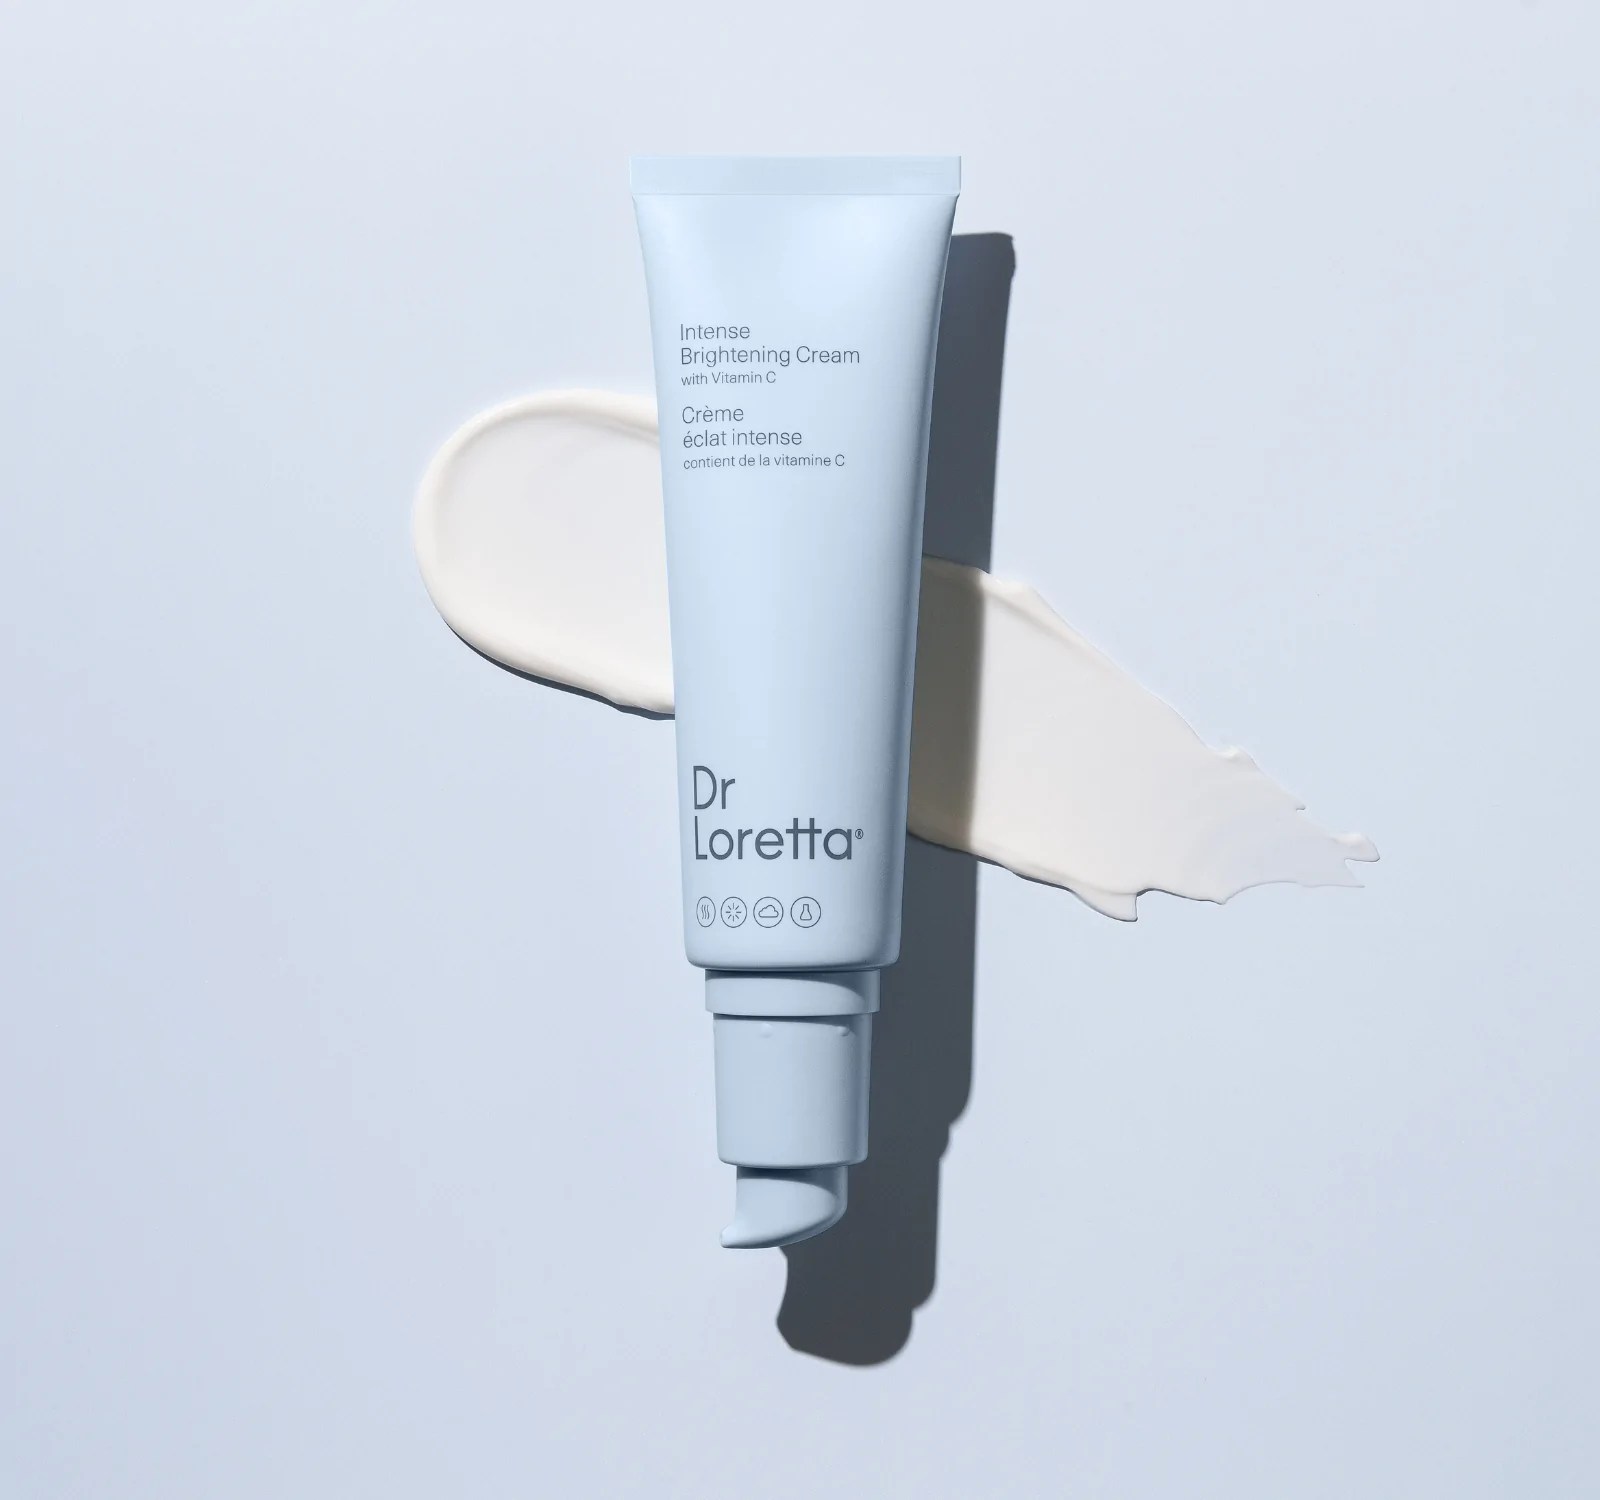 dr. loretta intense brightening cream tube on top of a product swatch on a light blue background